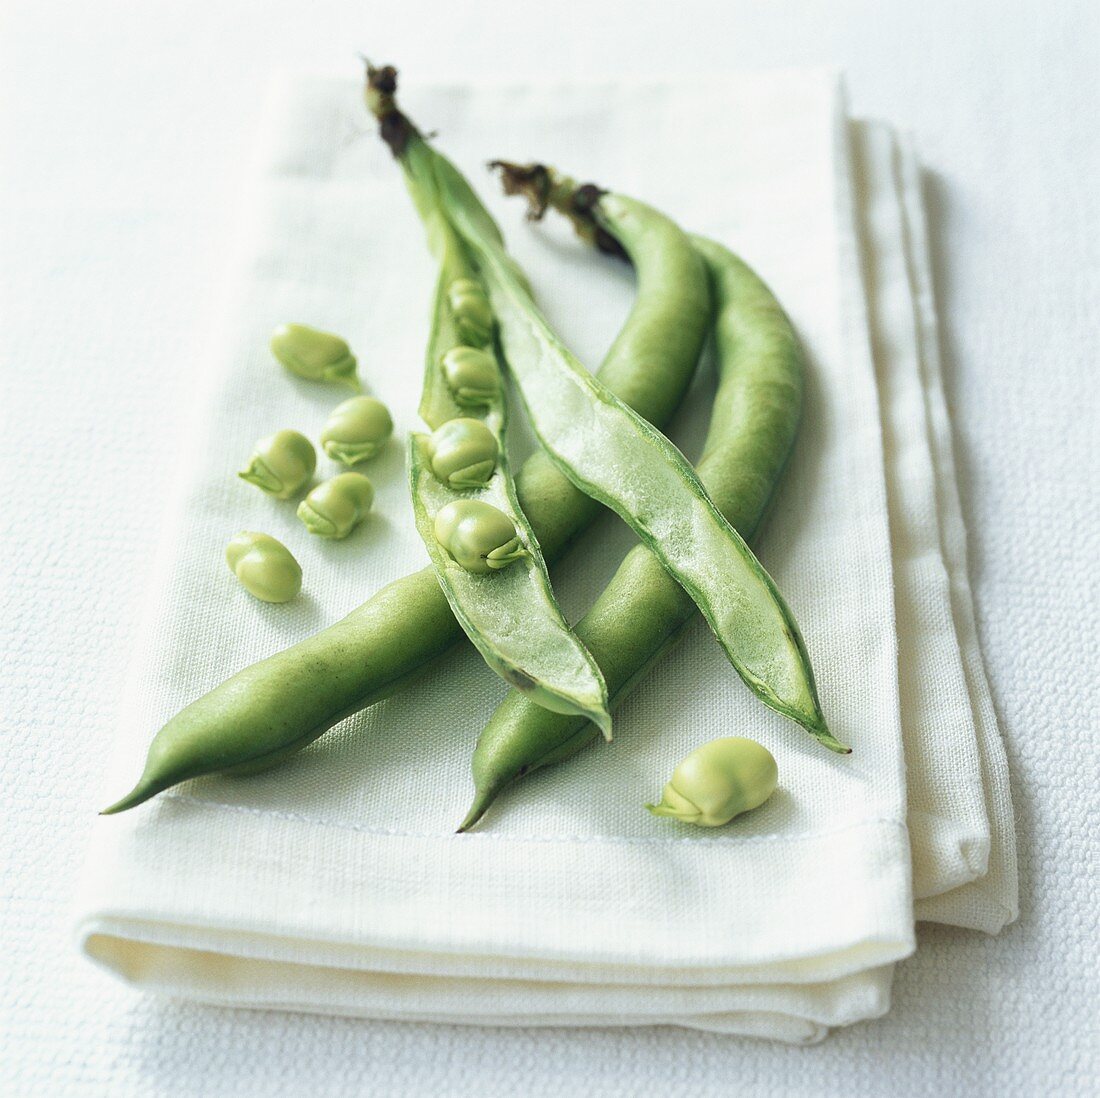 Broad beans, one pod opened